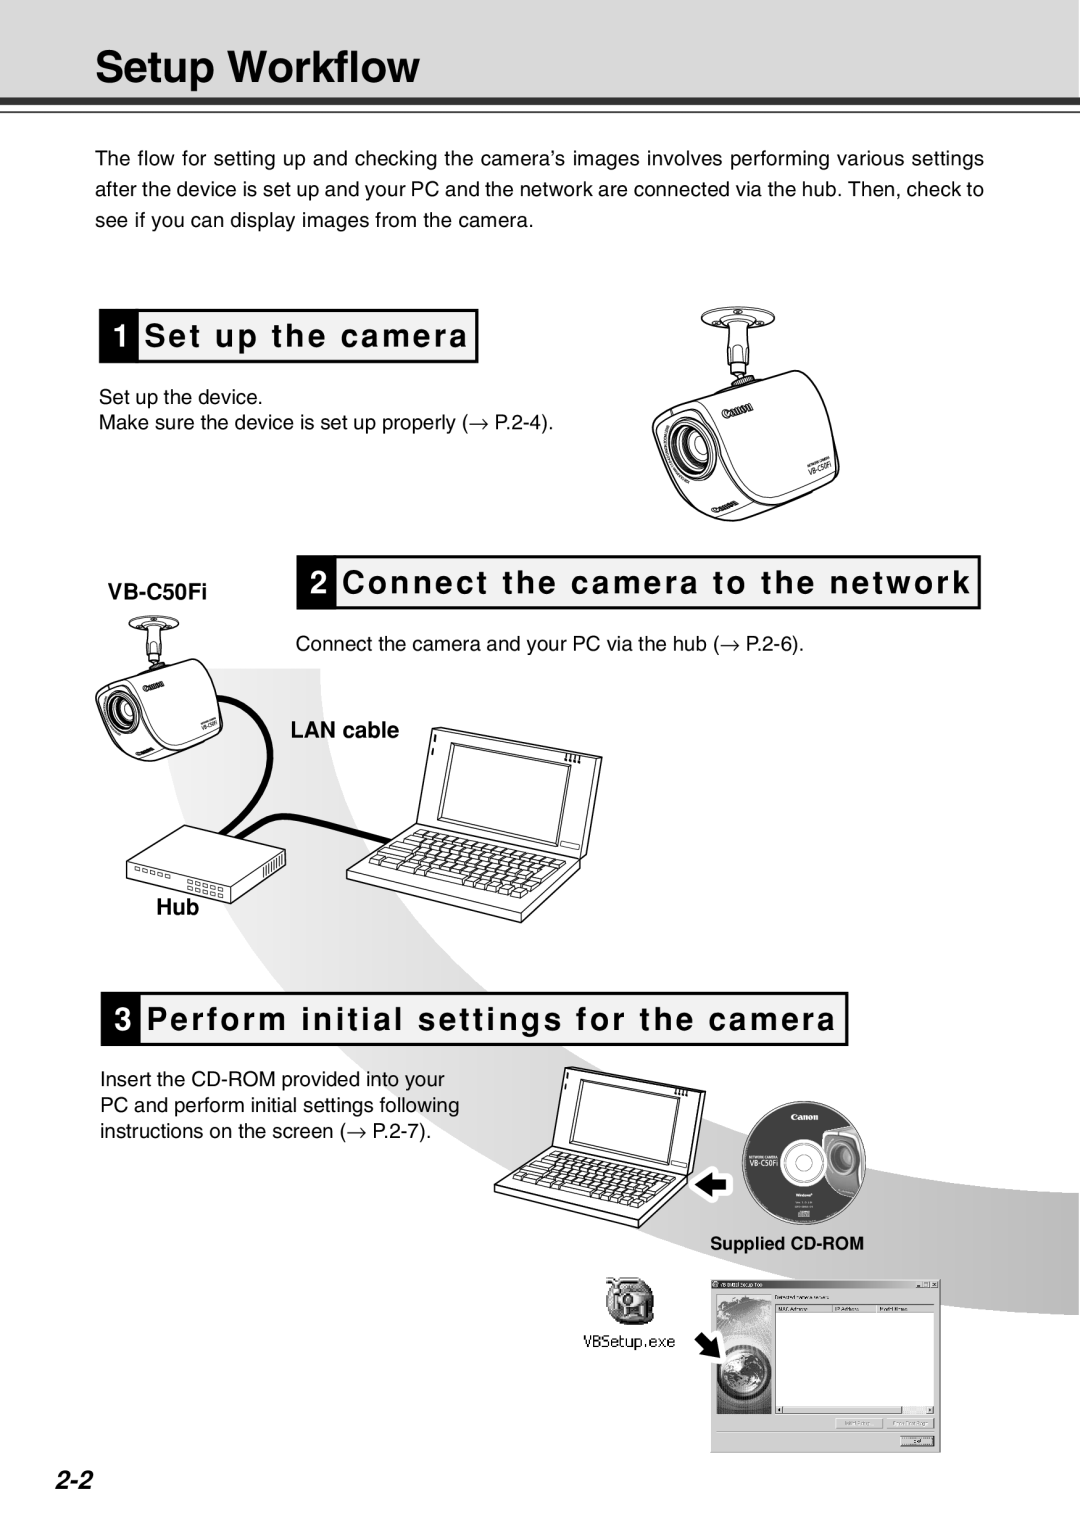 Canon Vb-C50fi user manual Setup Workflow, Set up the camera, Connect the camera to the network 